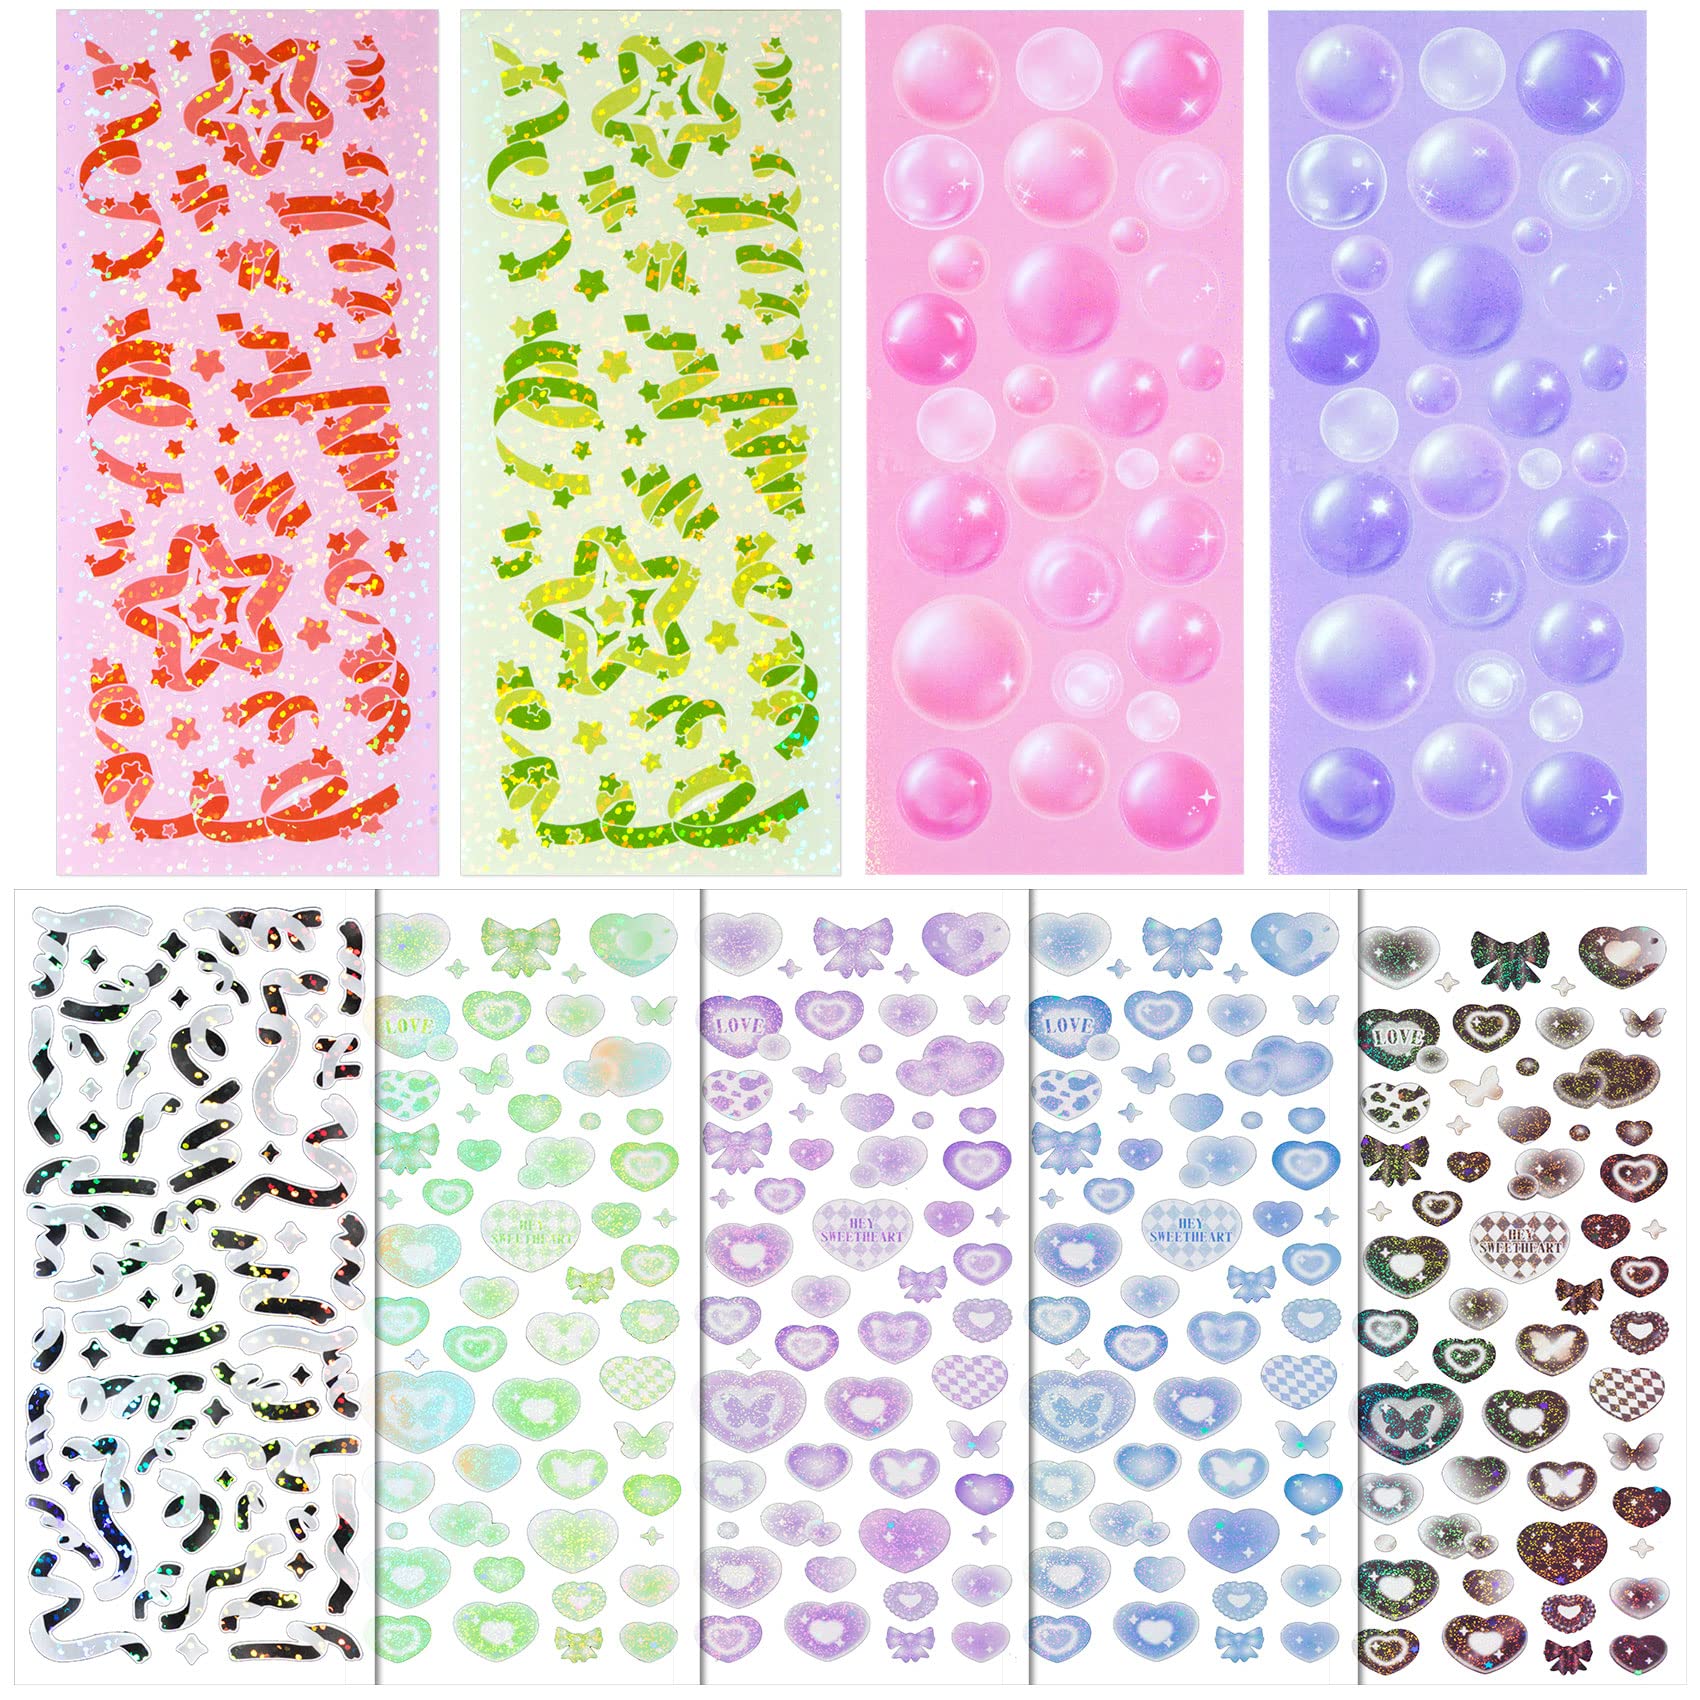 16 Sheets Korean Deco Stickers Set, DIY Colorful Glitter Self Adhesive  Stickers with Flower Style, Kpop Photocard Stickers Rose Lily Daisy Tulip